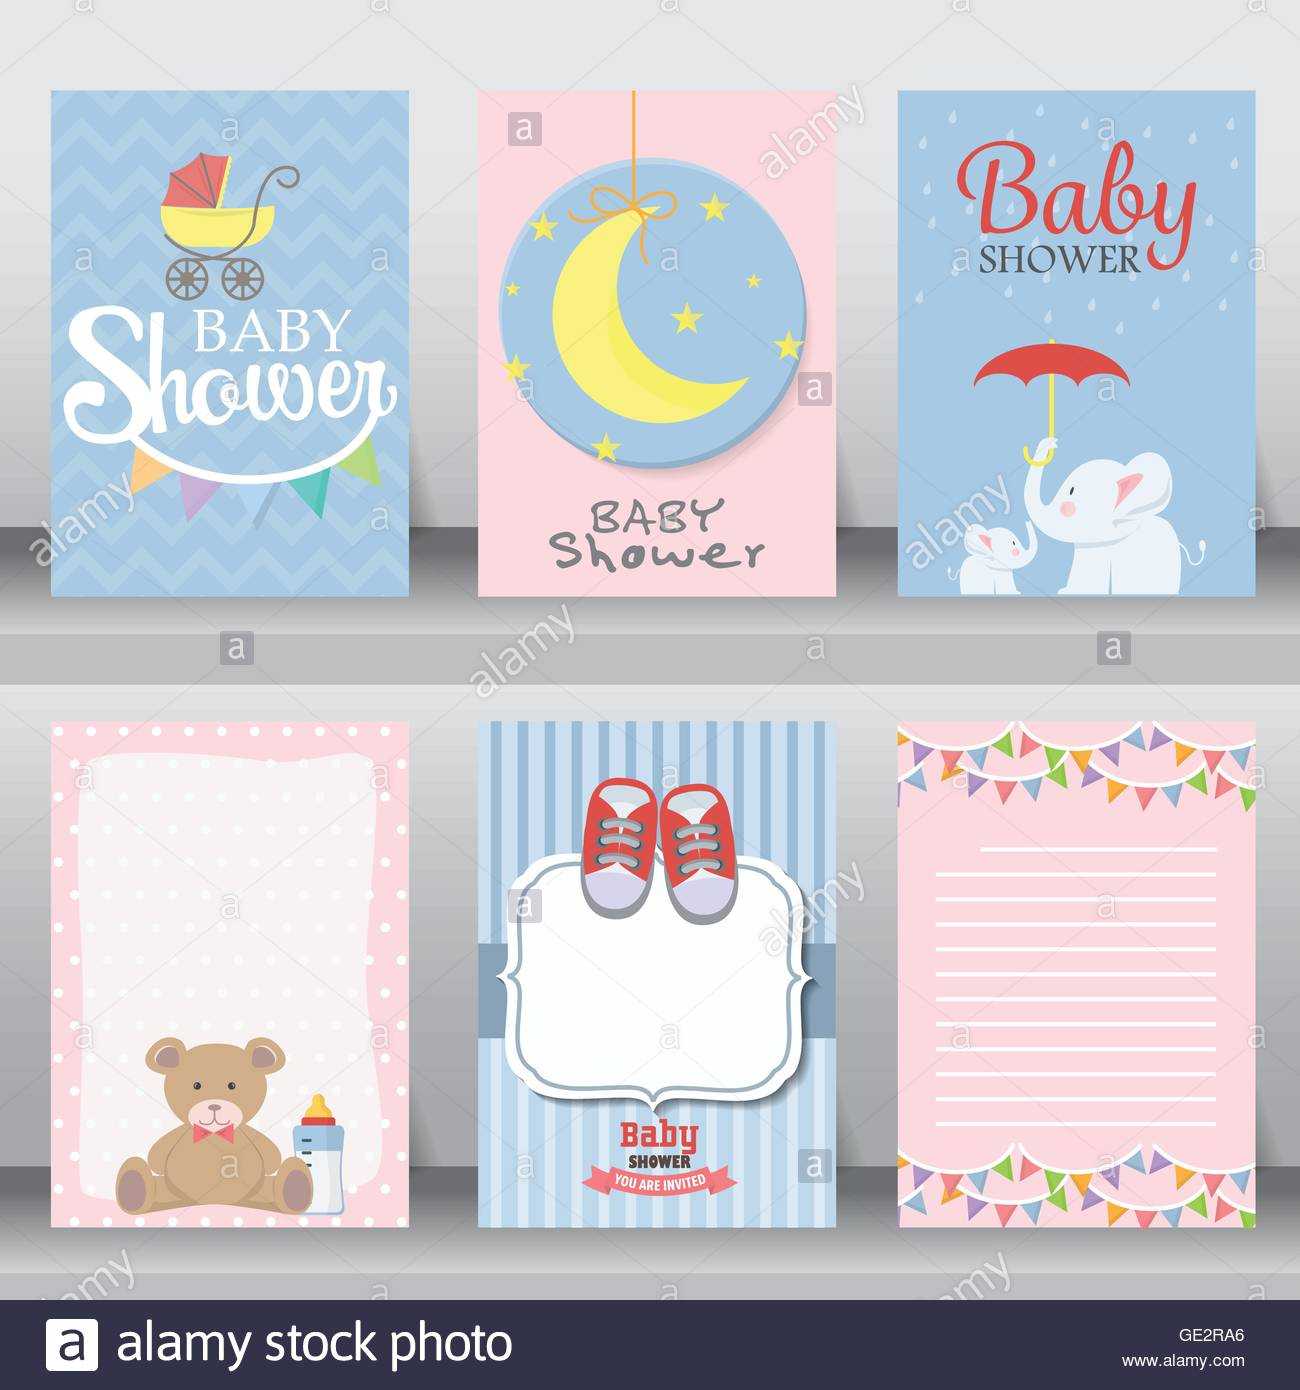 Baby Shower Party Greeting And Invitation Card. Layout Within Greeting Card Layout Templates